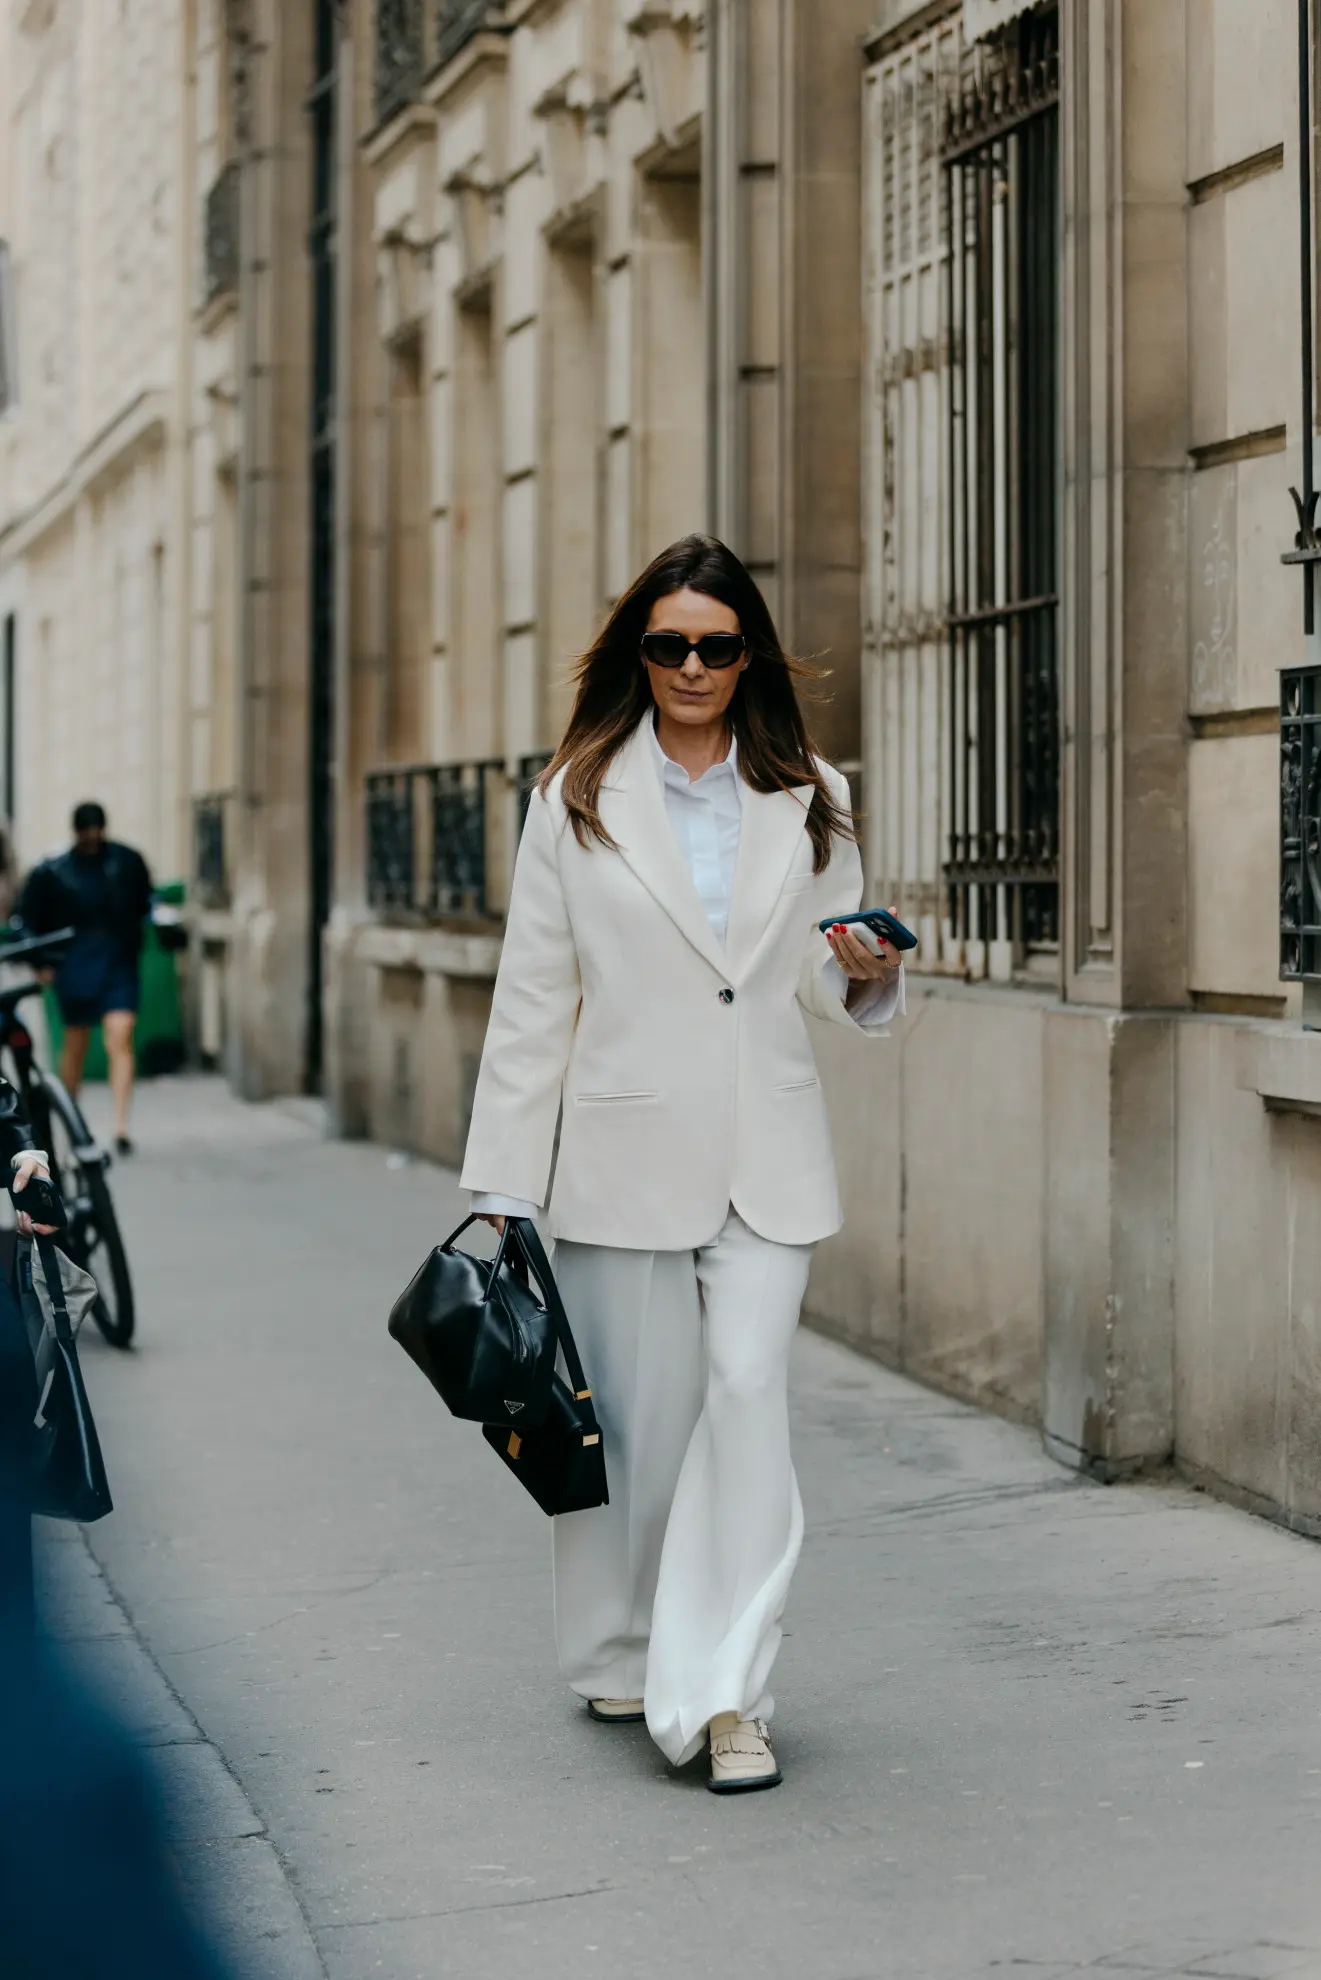 Parisian woman wearing a white suit with suede loafers